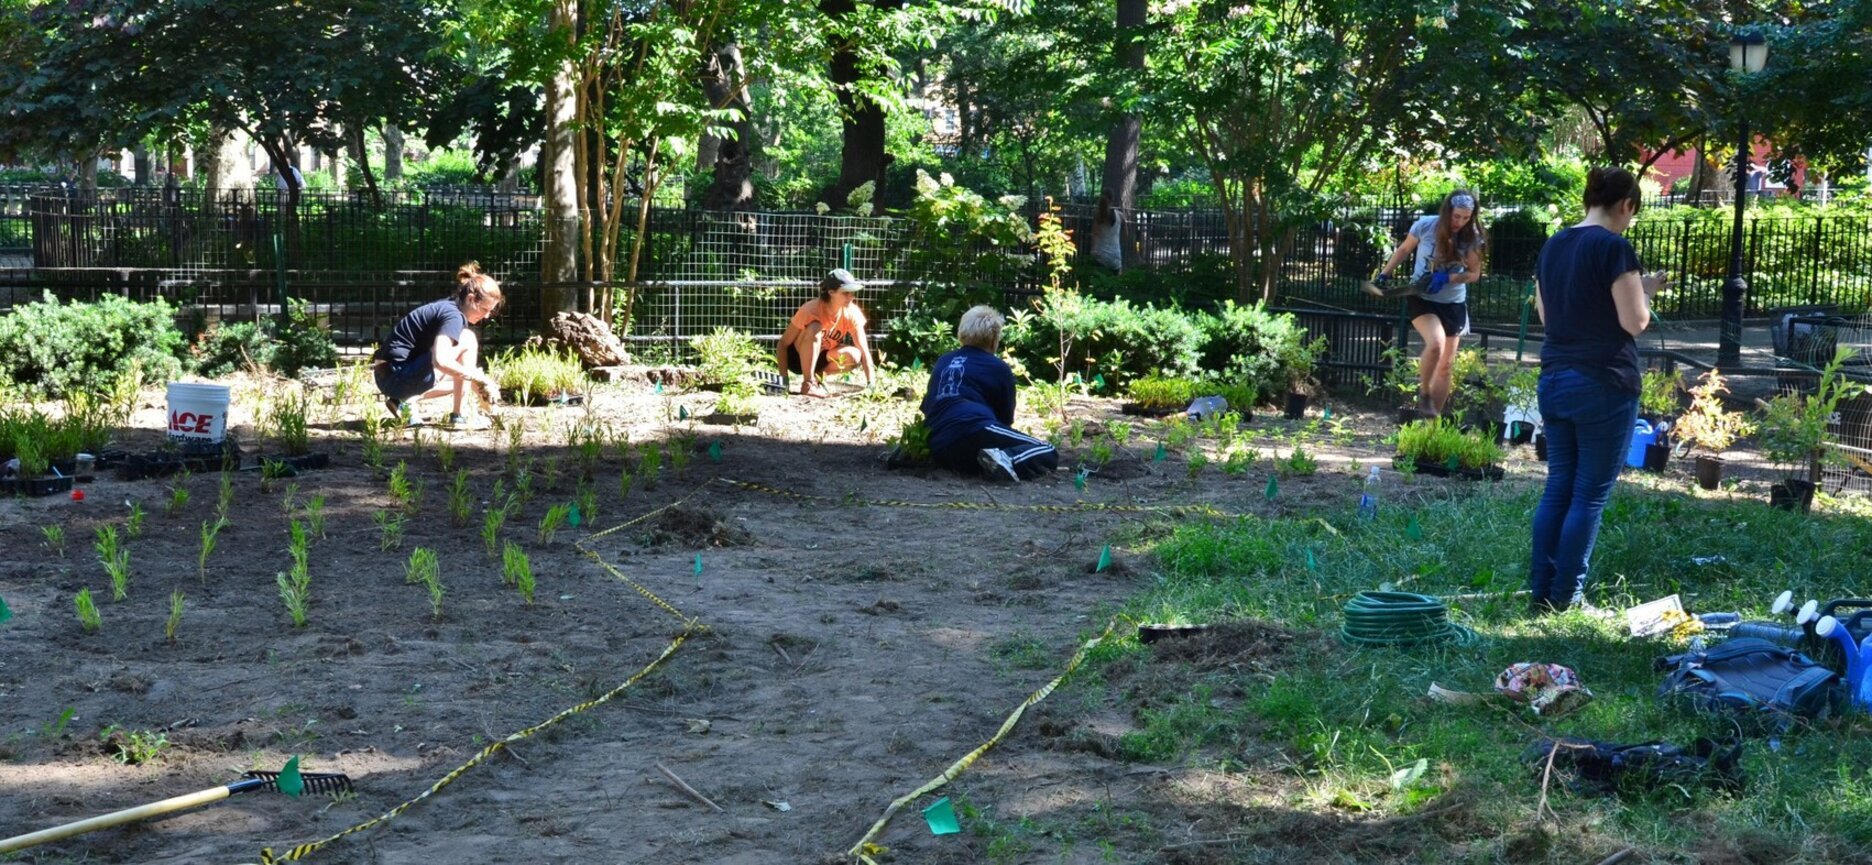 NYC Audubon volunteers and staff lay out a native plant garden in McGolrick Park, Brooklyn. Photo: Chris Kreussling